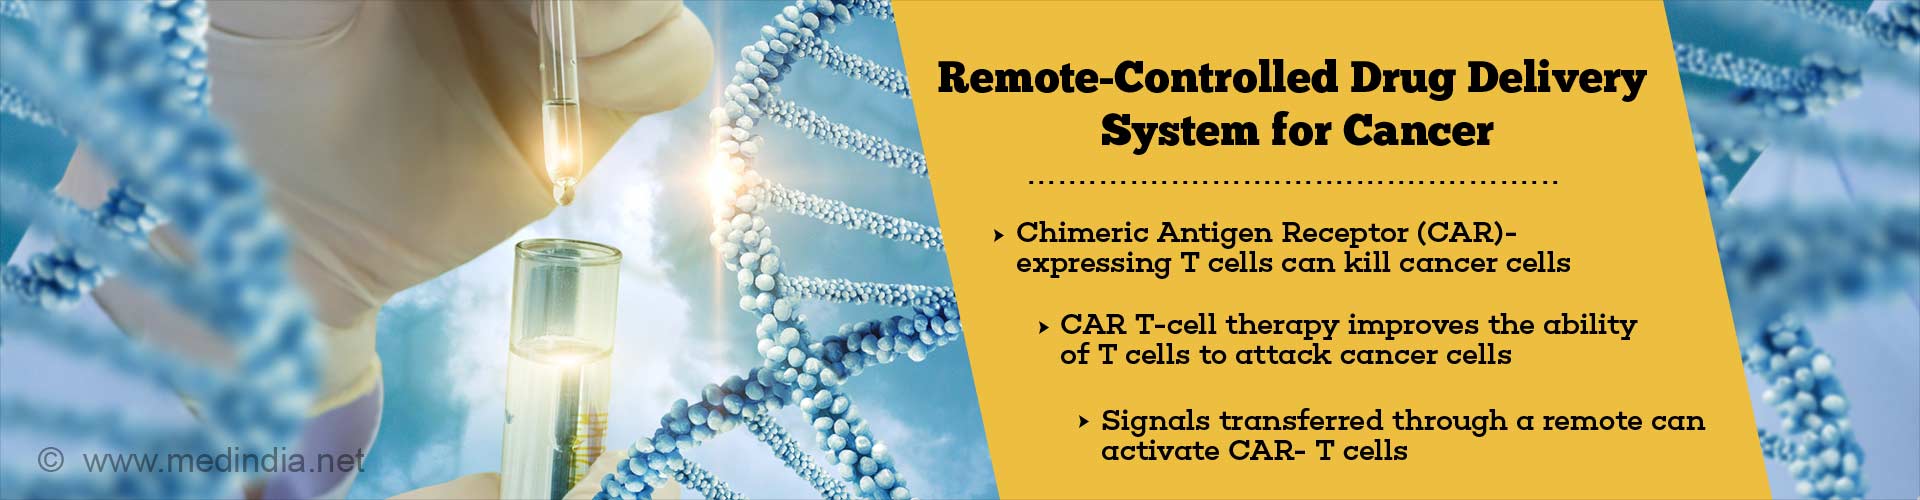 remote-controlled drug delivery system for cancer
- chimeroc antigen receptor (CAR) T cells can kill cancer cells
- CAR T-cell therapy improves the ability of T cells to attack cancer cells
- signals transferred through a remote can activate CAR- T cells